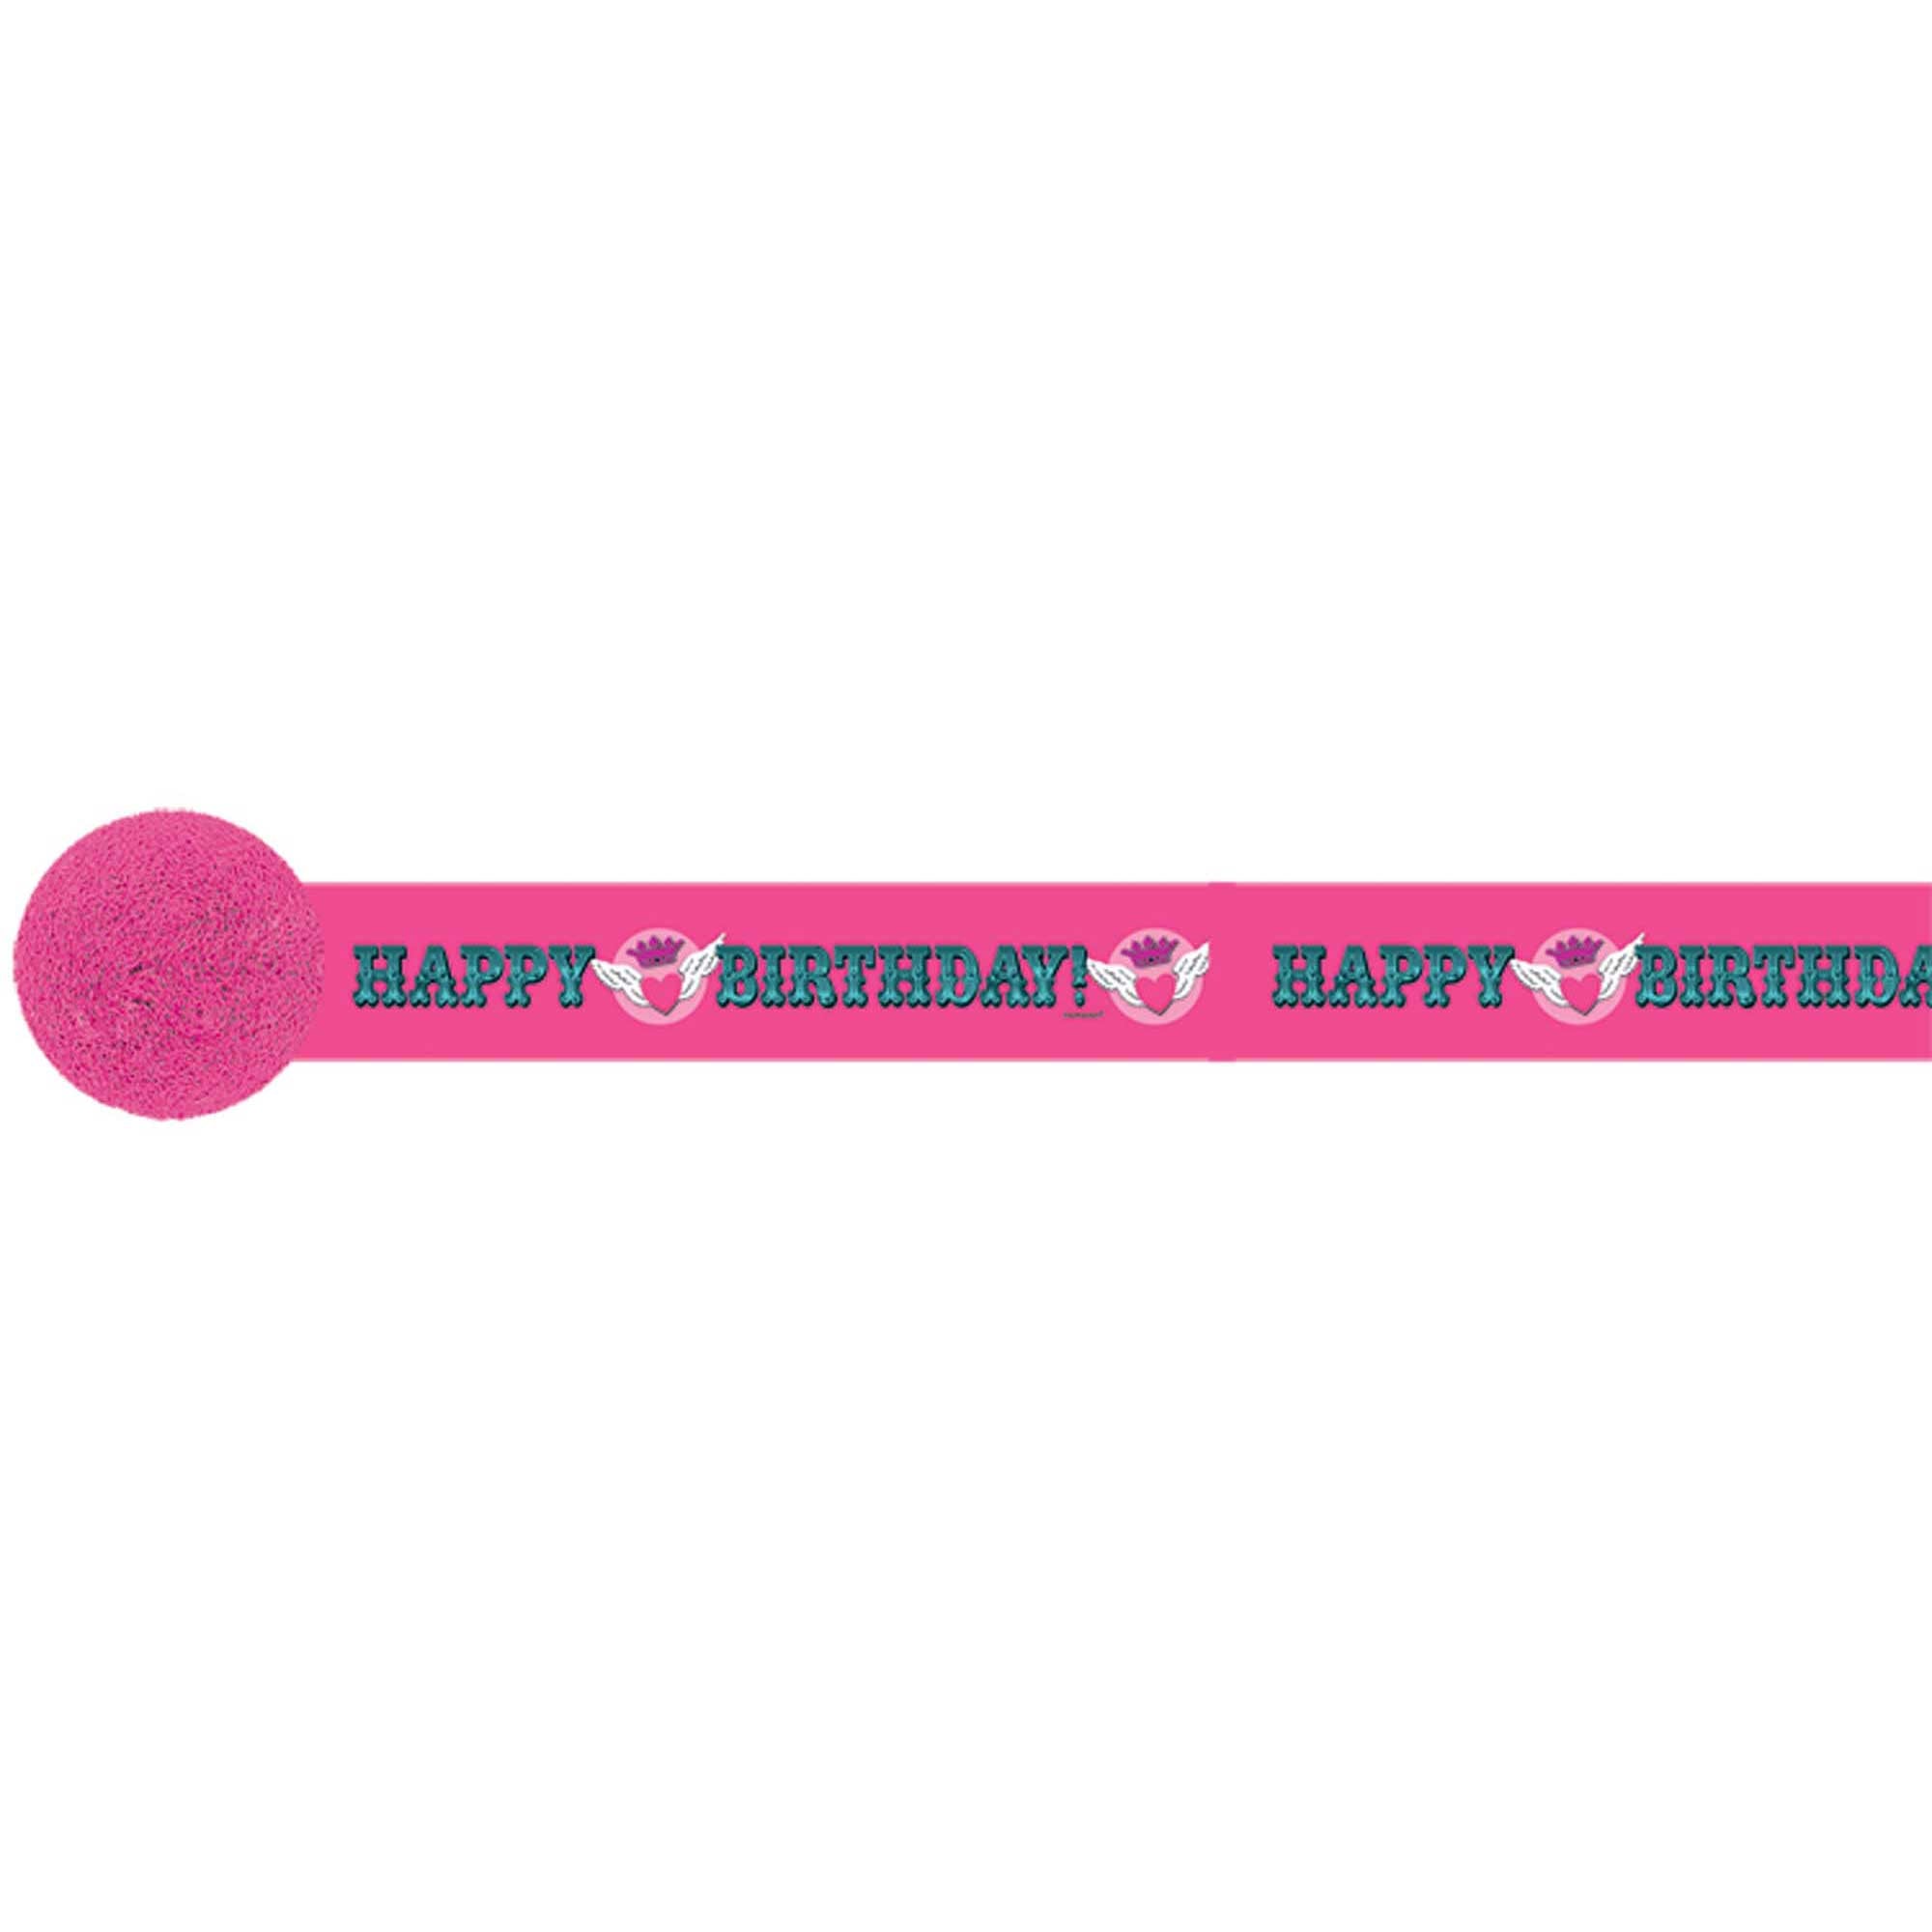 Rocker Birthday Crepe Streamer 30ft Decorations - Party Centre